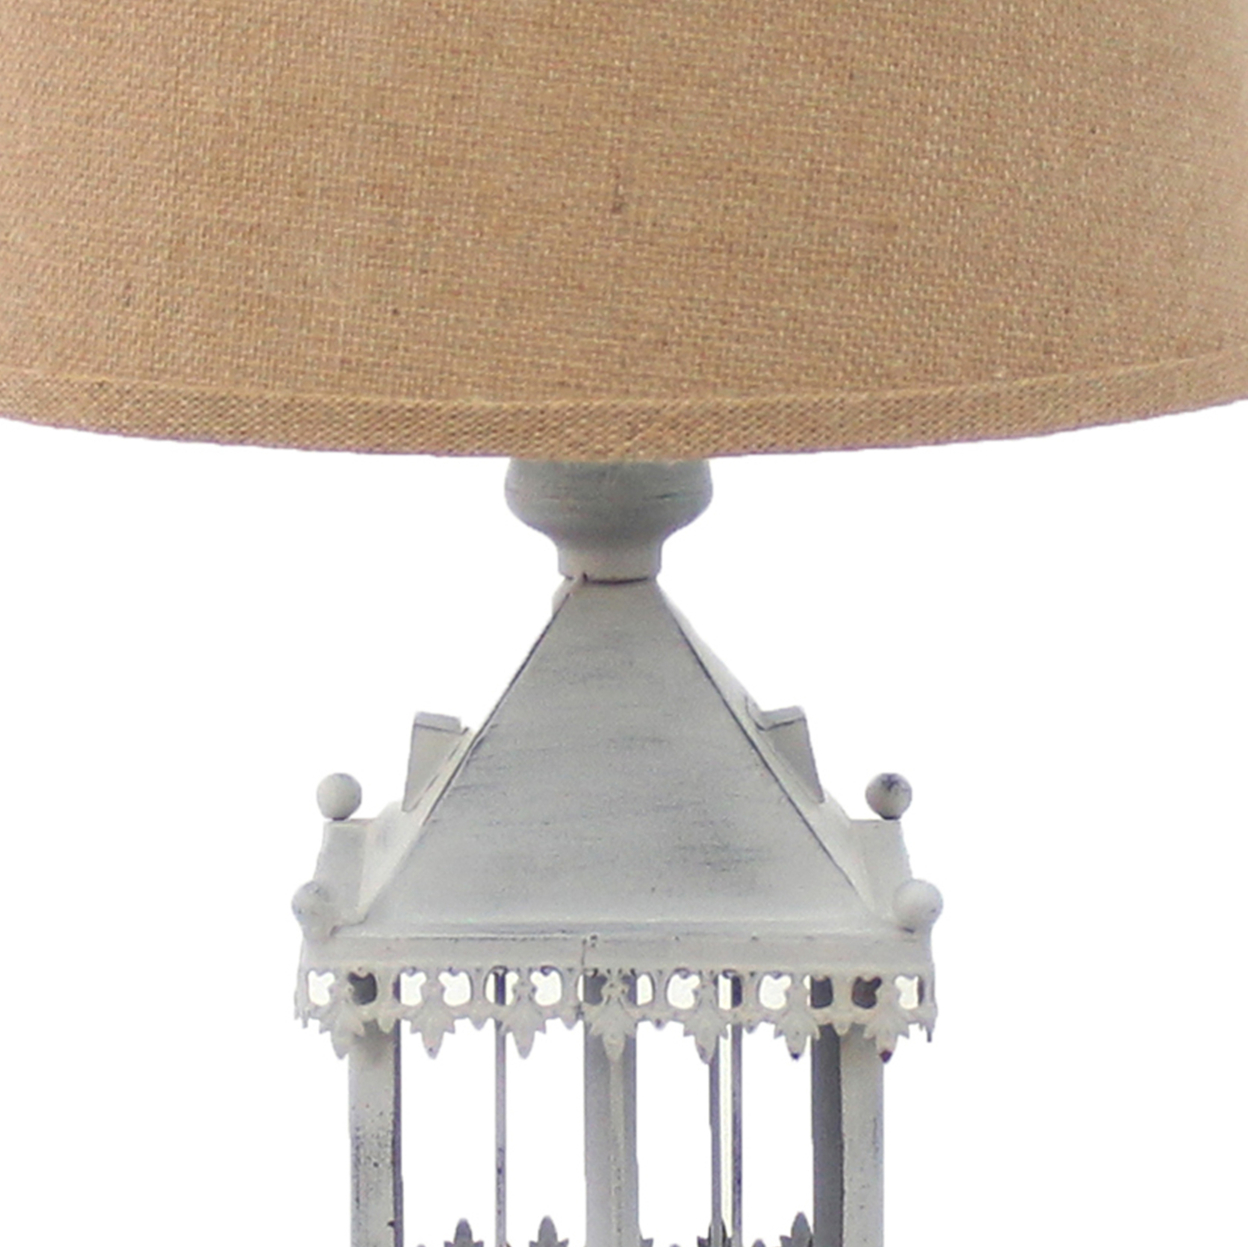 Metal Temple Design Base Table Lamp With Fabric Shade, Beige And Gray- Saltoro Sherpi